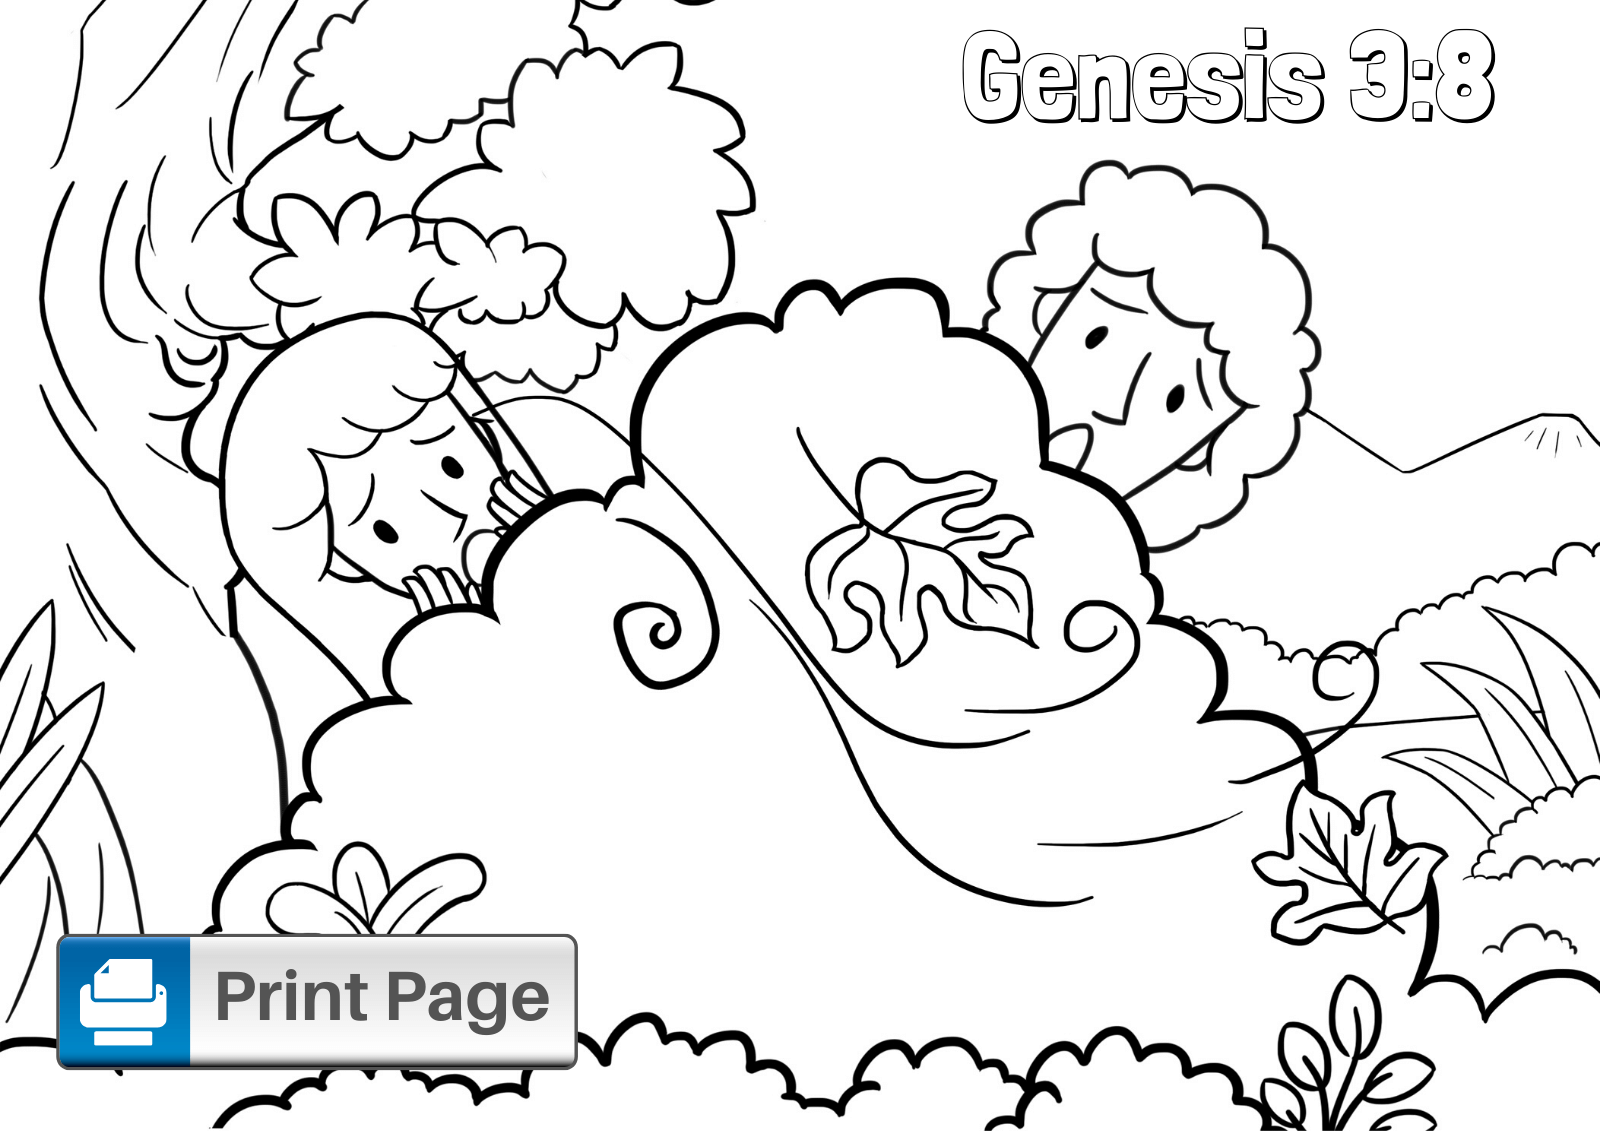 Free Printable Adam And Eve Coloring Pages For Kids ConnectUS